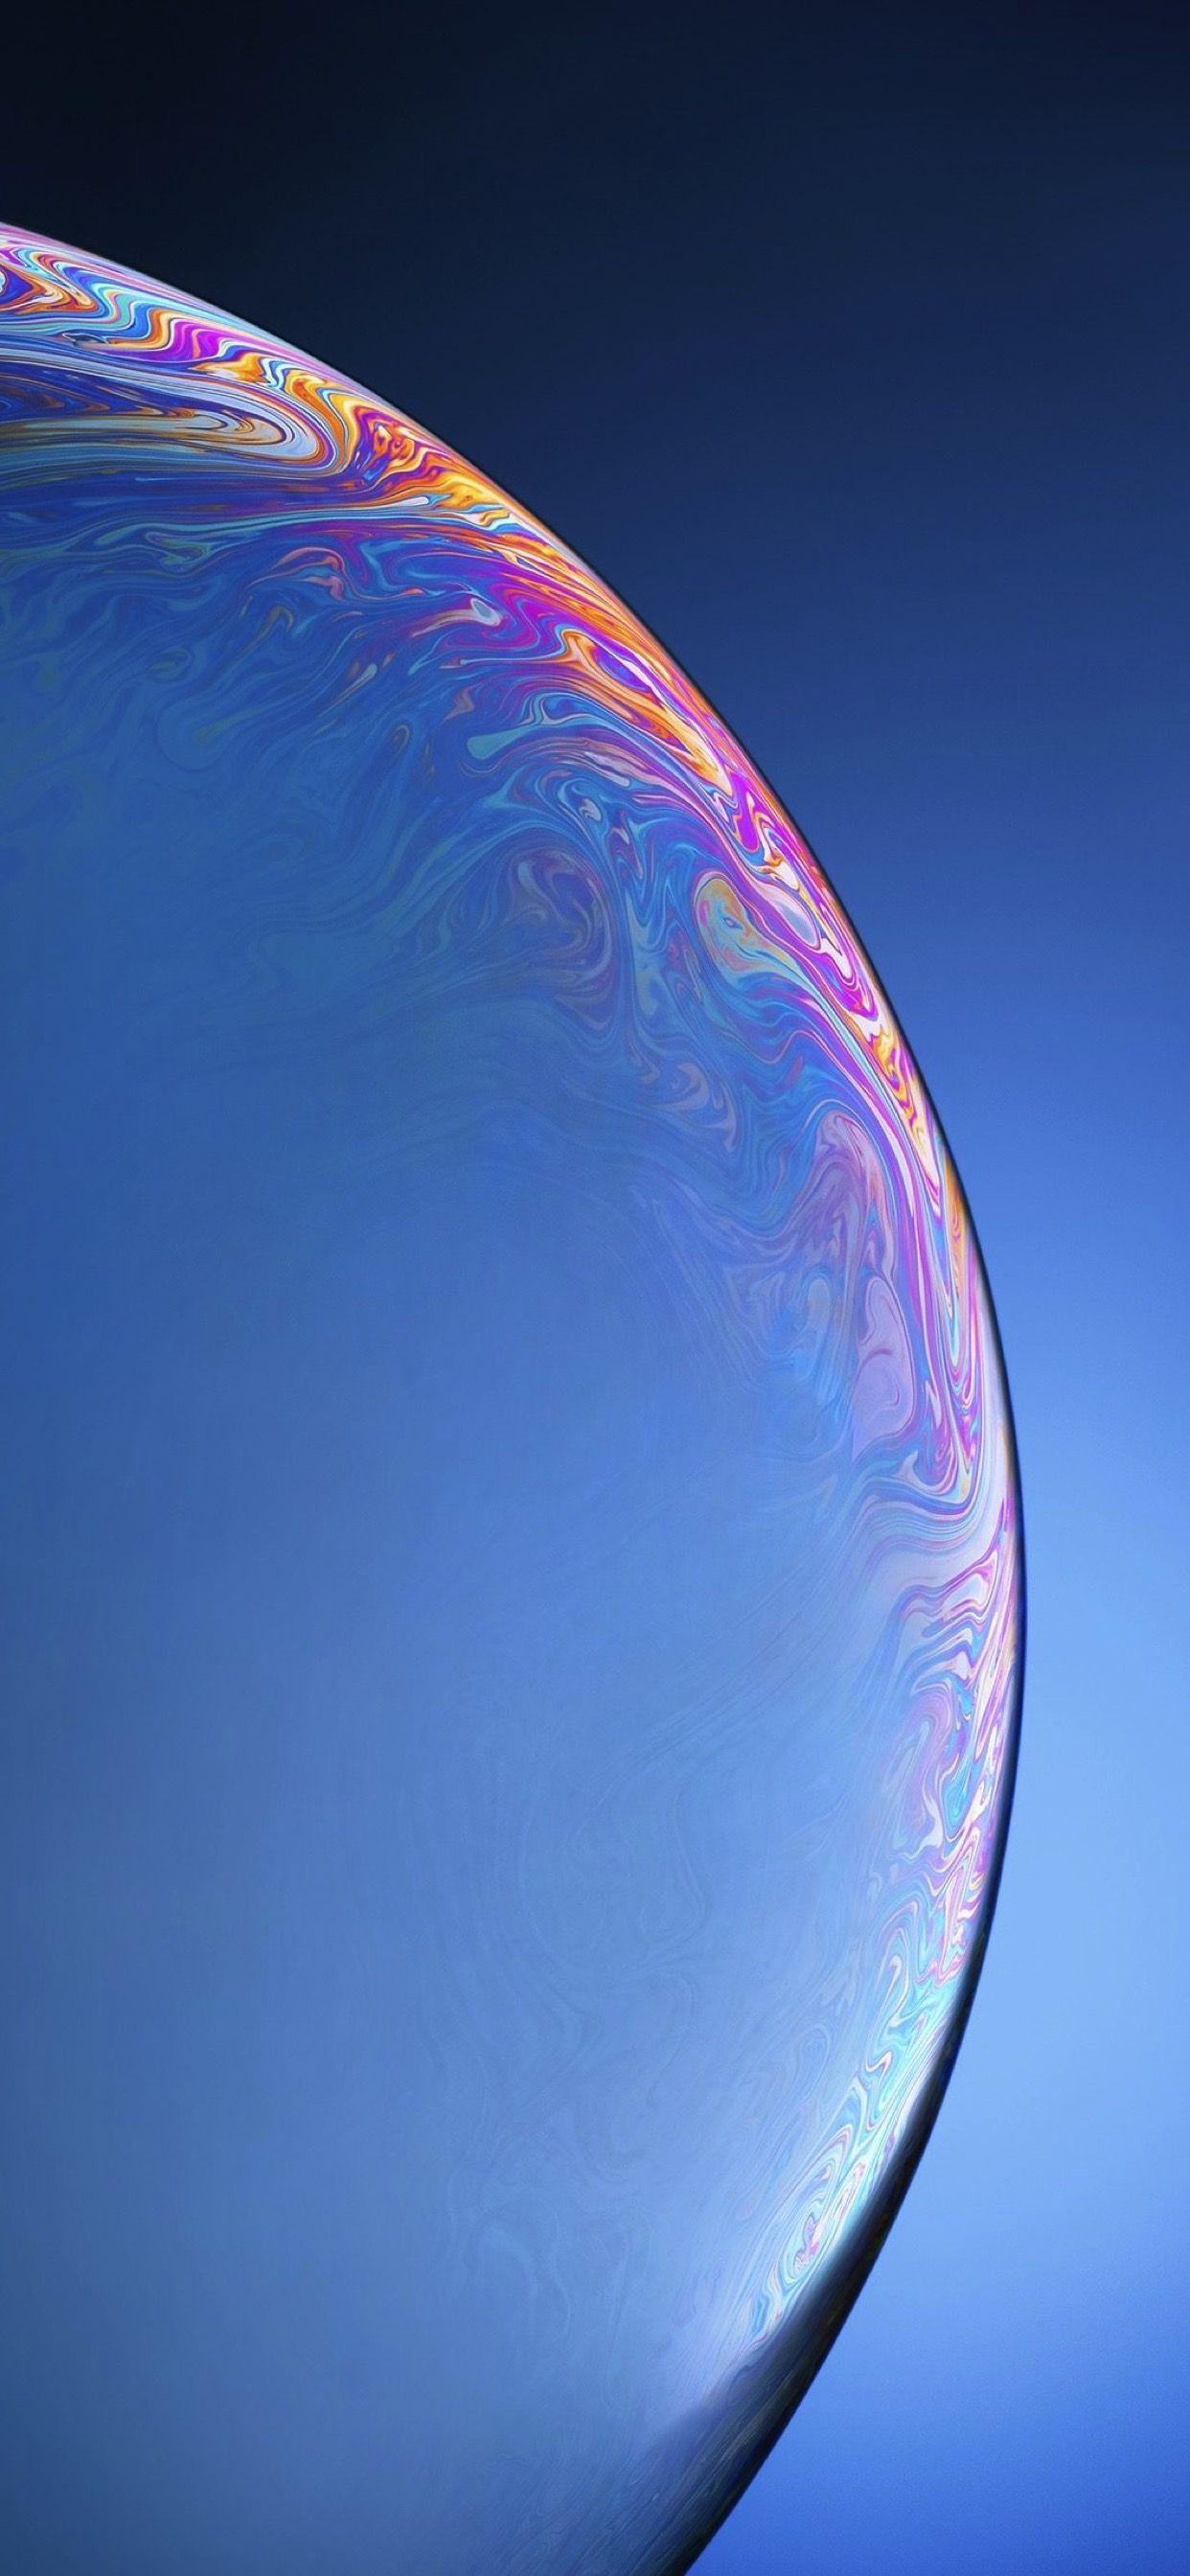 iPhone XS Max Earth Wallpapers - Wallpaper Cave